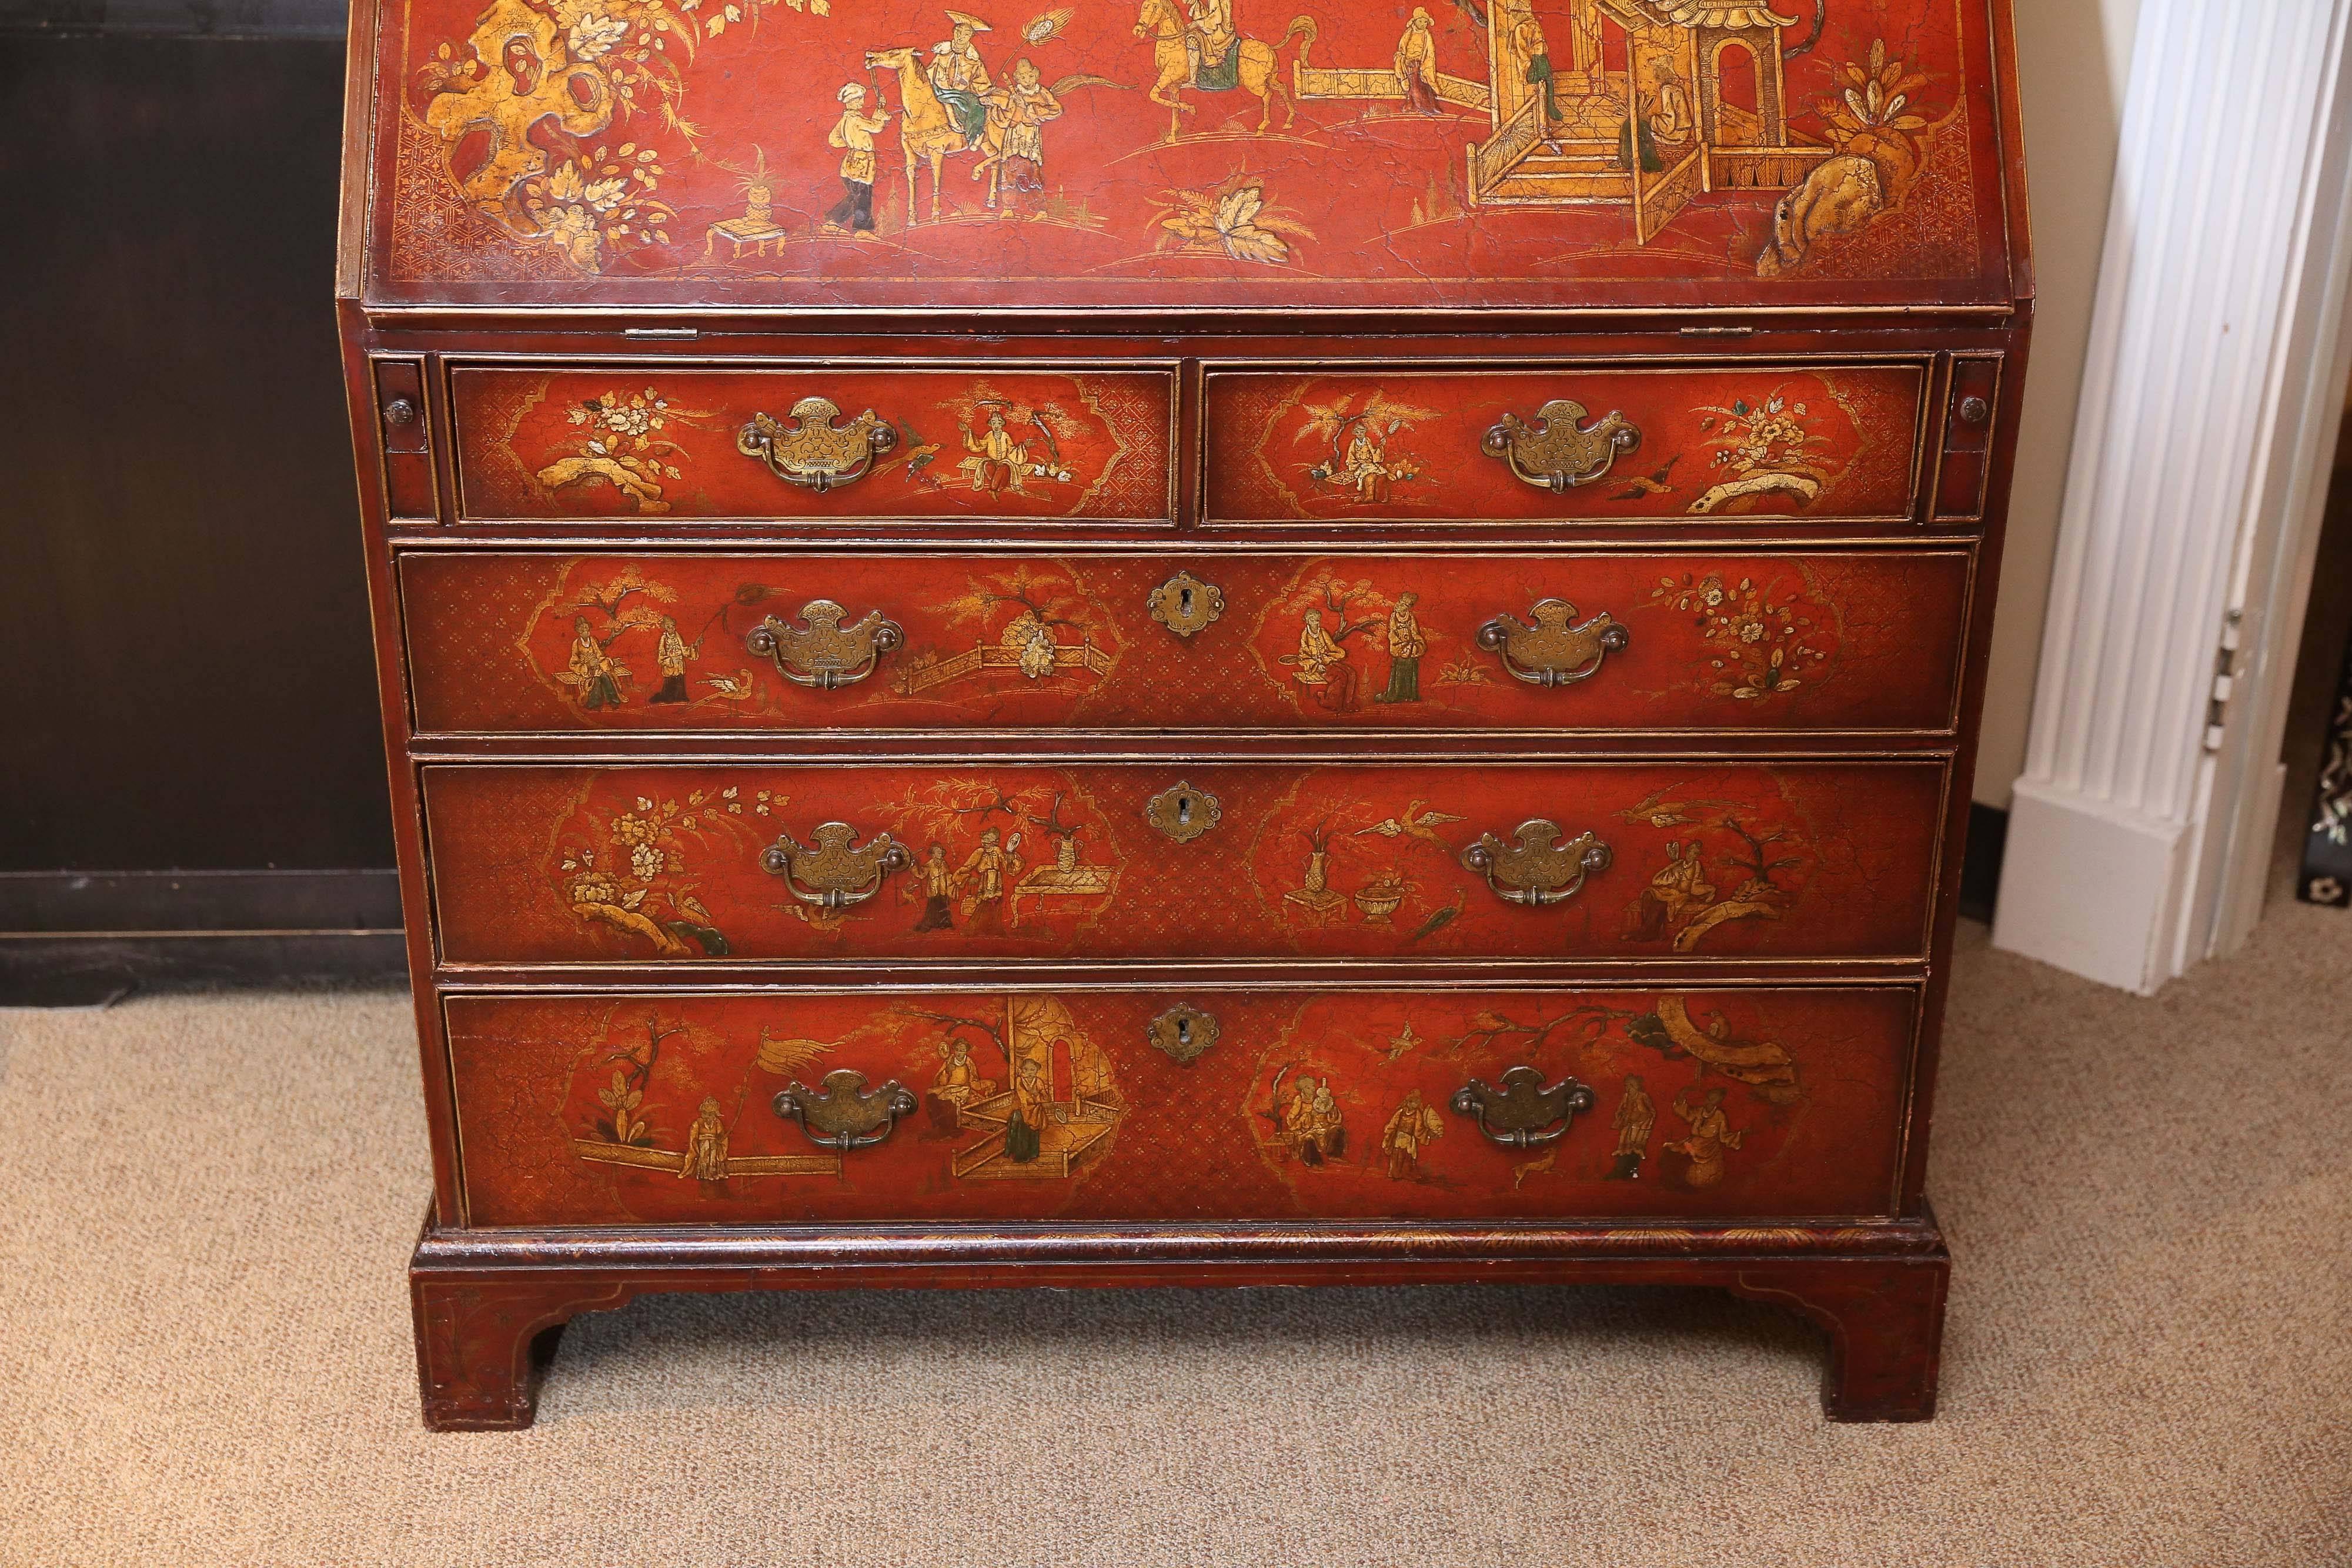 Very Fine English made slant front chinoiserie secretary. Red lacquered and
Hand-painted on all sides. This piece is well made by Charles Tozer.
It has a well fitted interior with hidden drawers. It has a broken arch 
Pediment and made in the